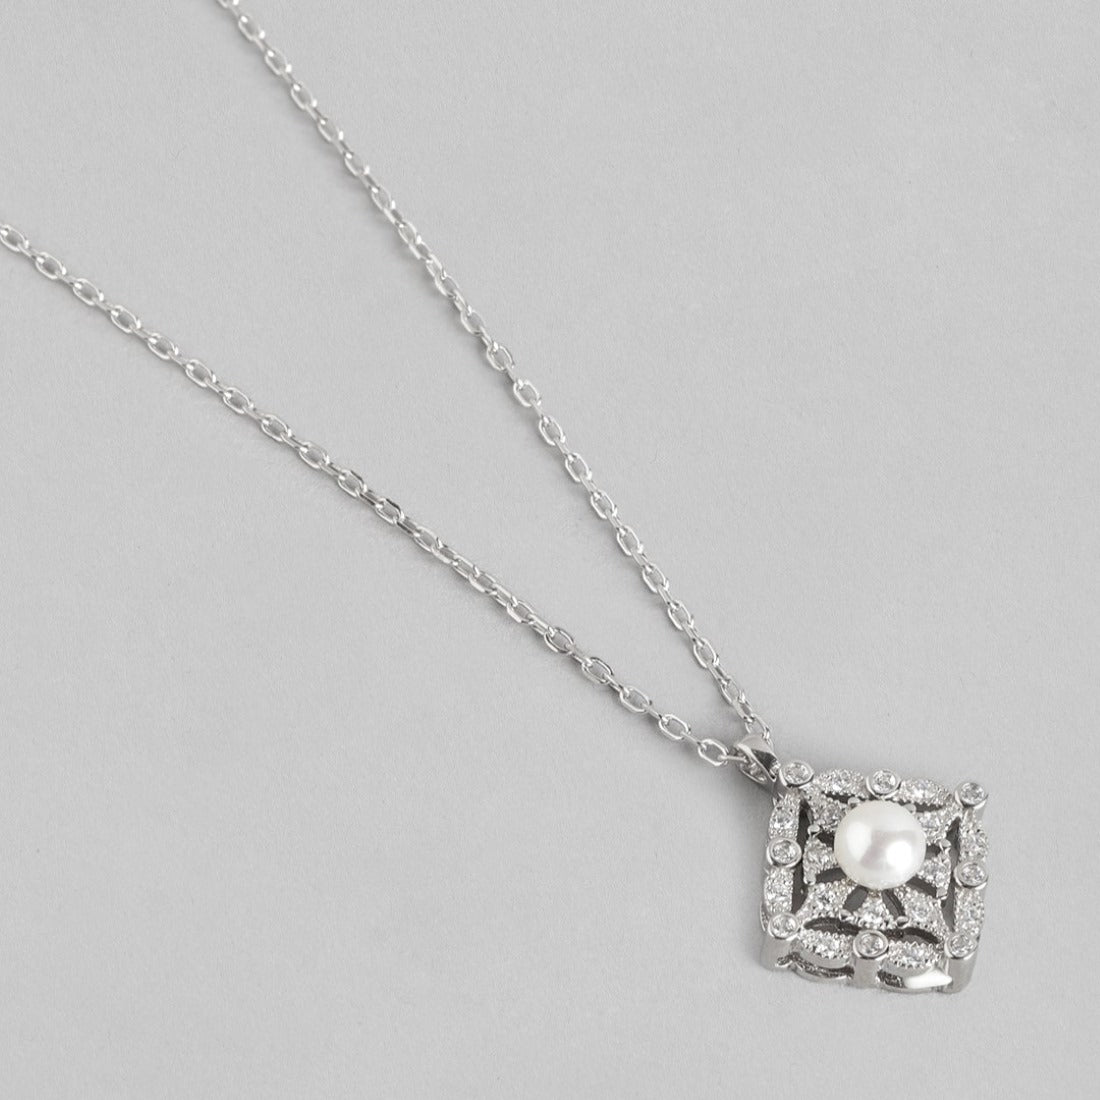 Square Elegance CZ Harmony Rhodium-Plated 925 Sterling Silver Necklace